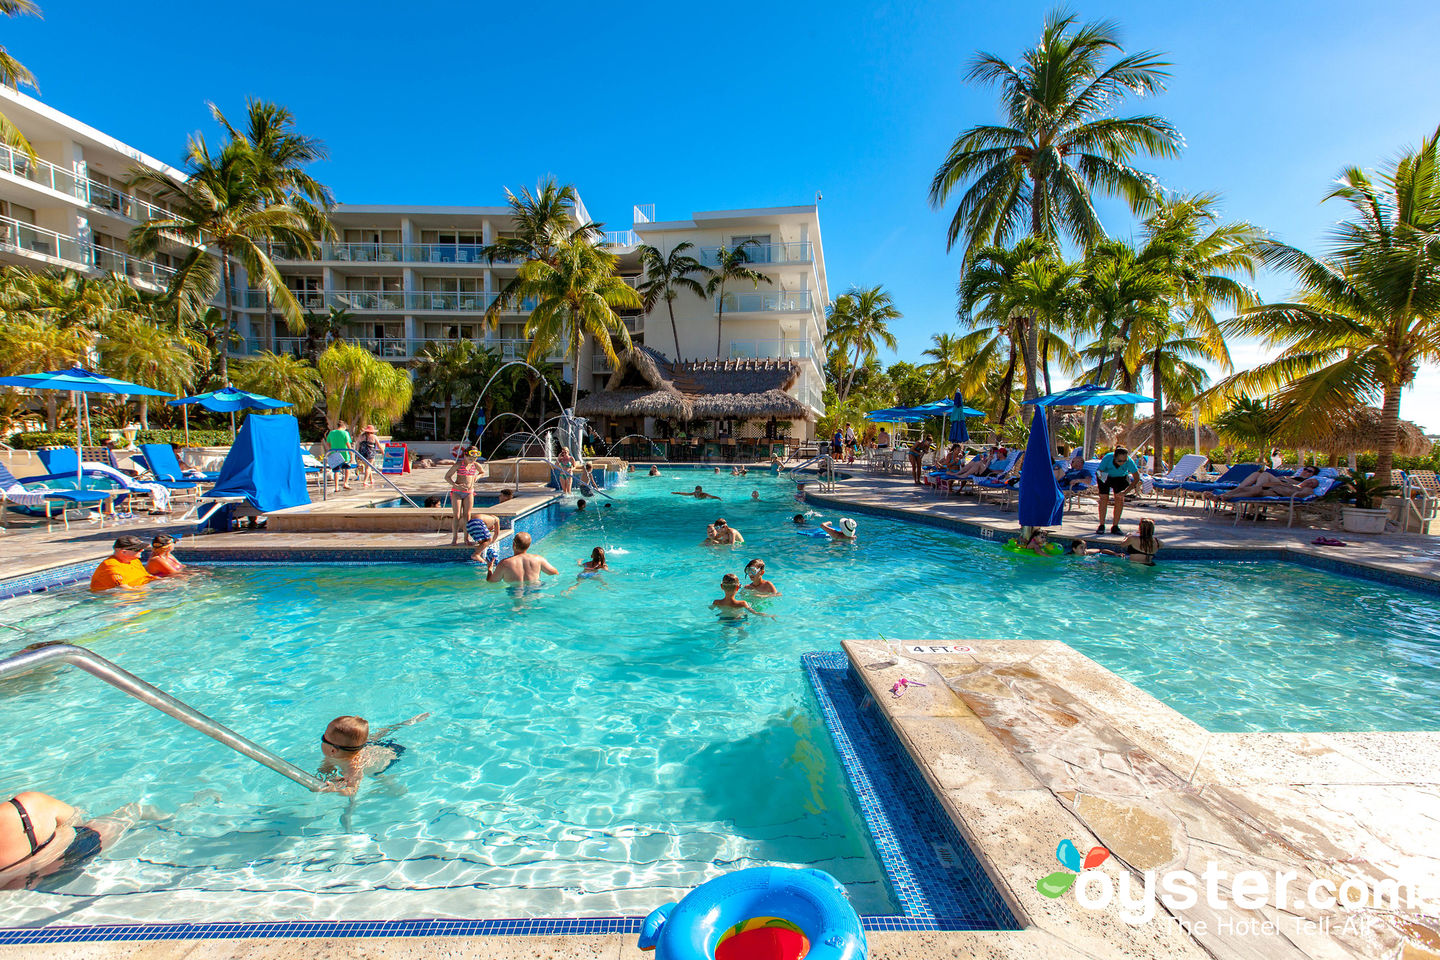 Key Largo Bay Marriott Beach Resort Review: What To REALLY Expect If